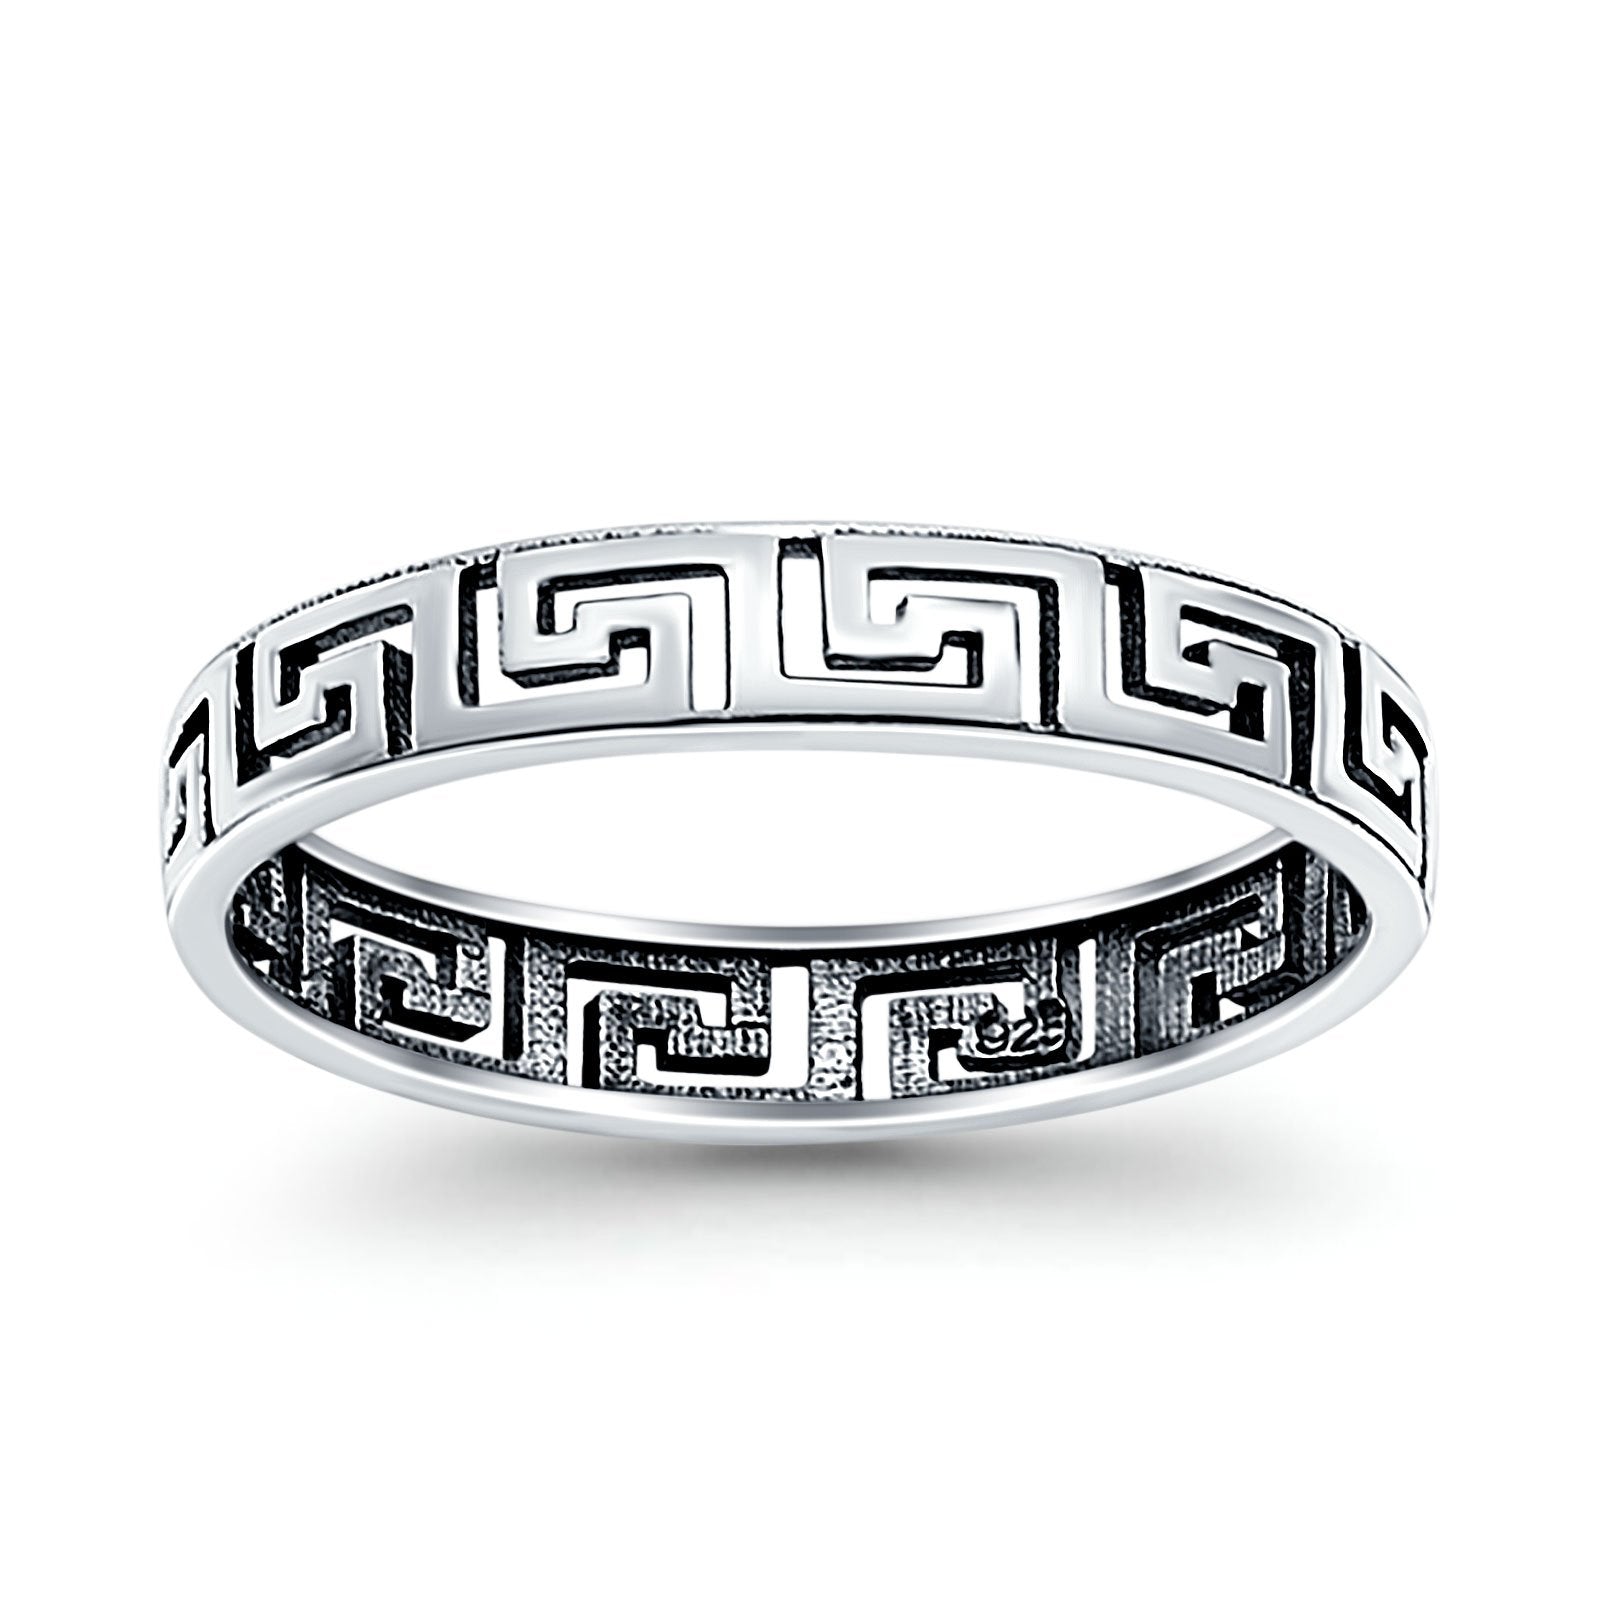 Blue Sterling Thumb – Apple Band Silver Imports Ring (4mm) 925 Solid Aztec Oxidized